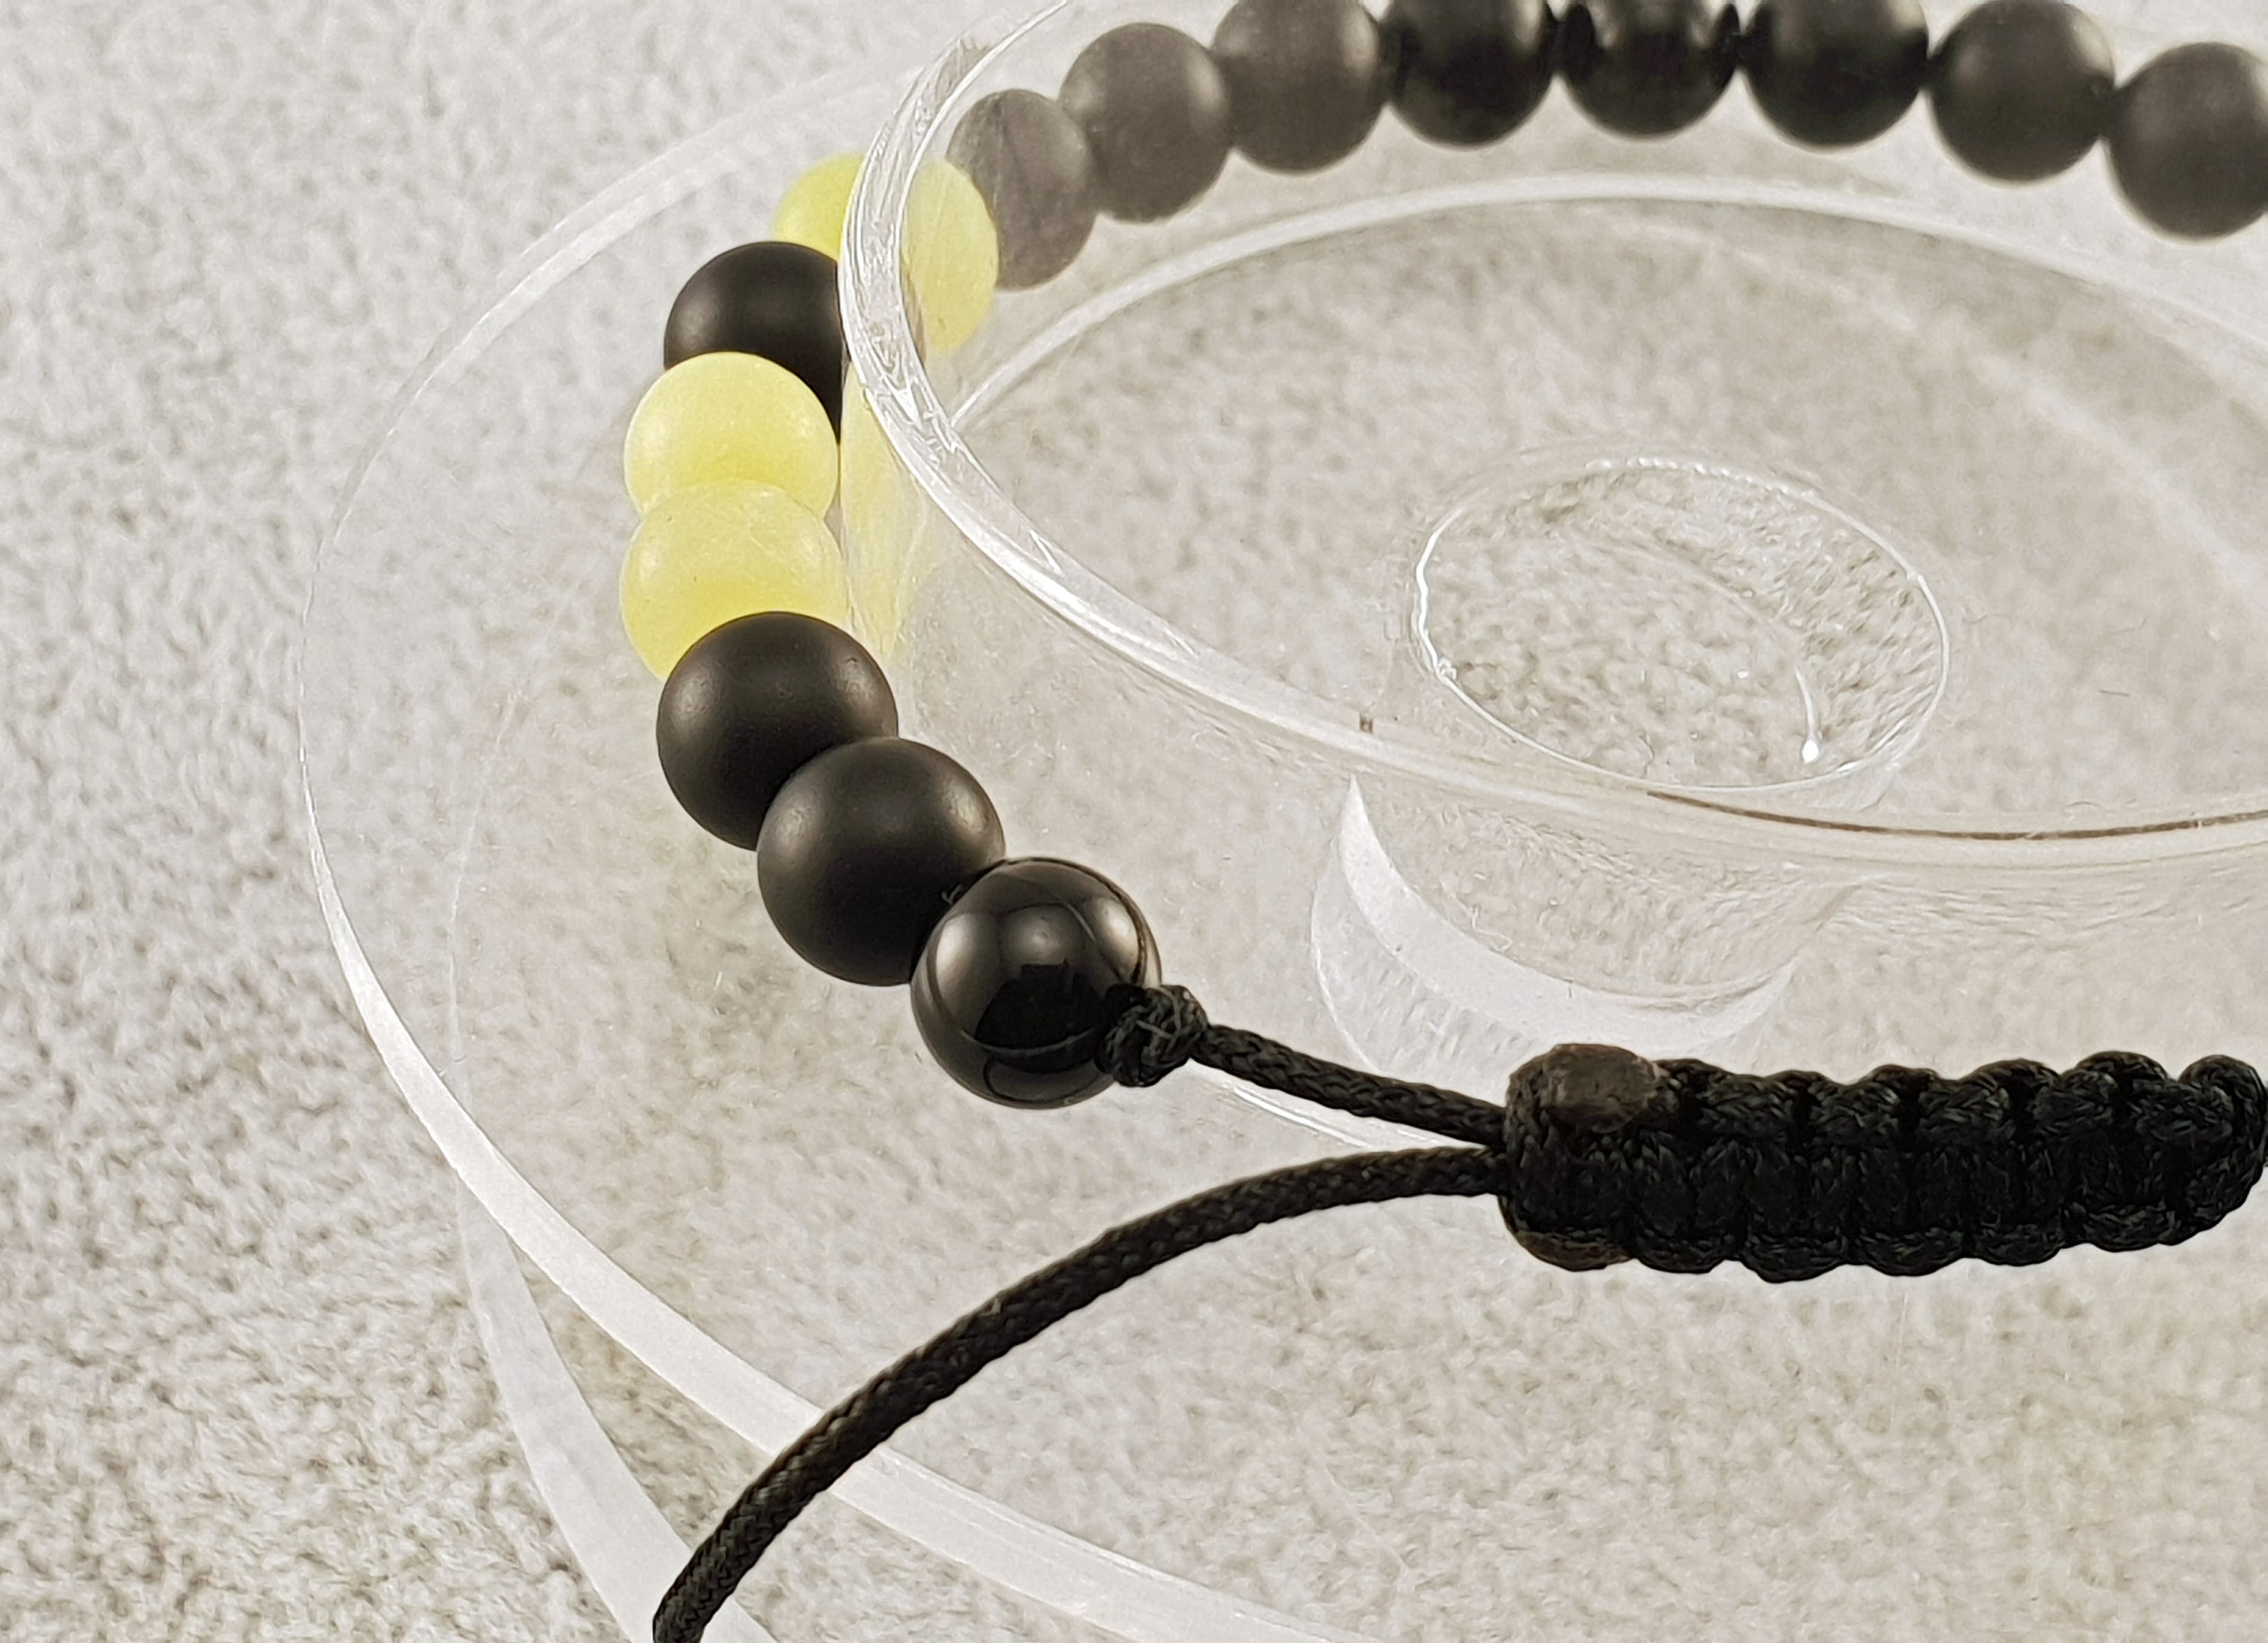 Agate & Jade Beads - Black and Yellow - By Janine Jewellery